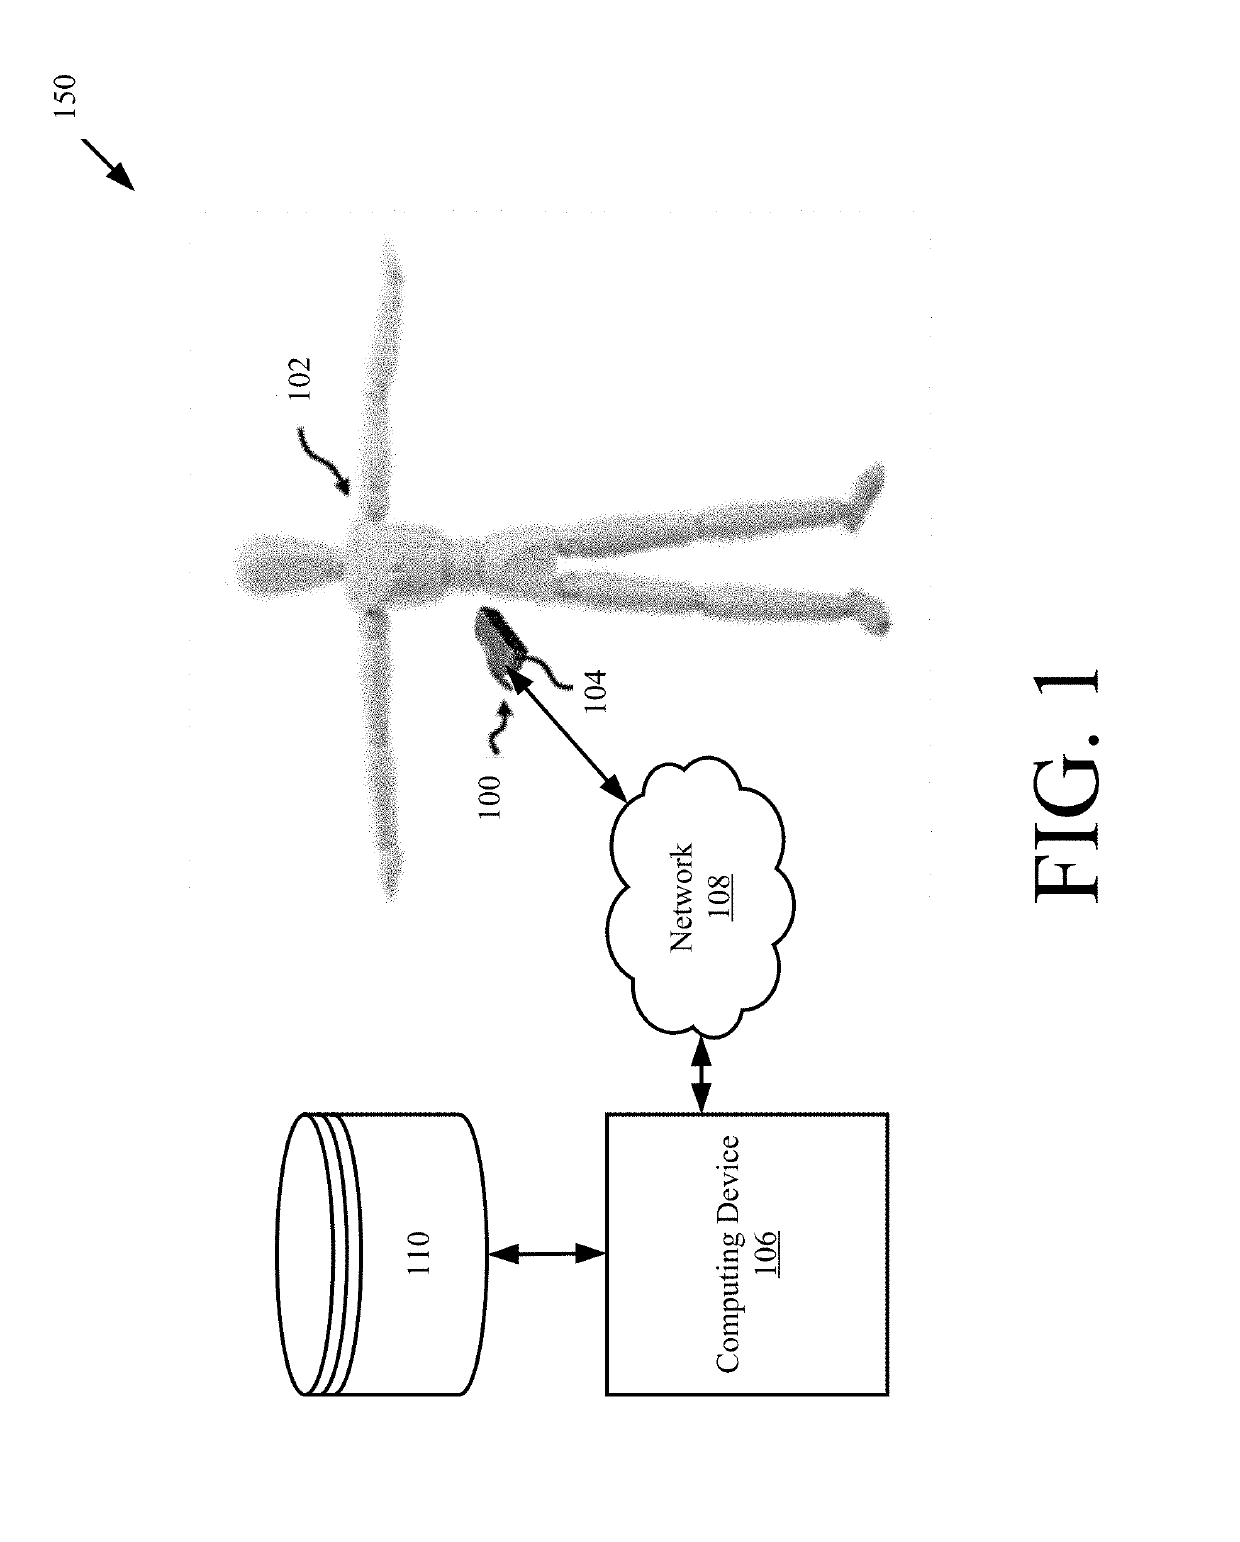 Systems and methods for generating a refined 3D model using radar and optical camera data